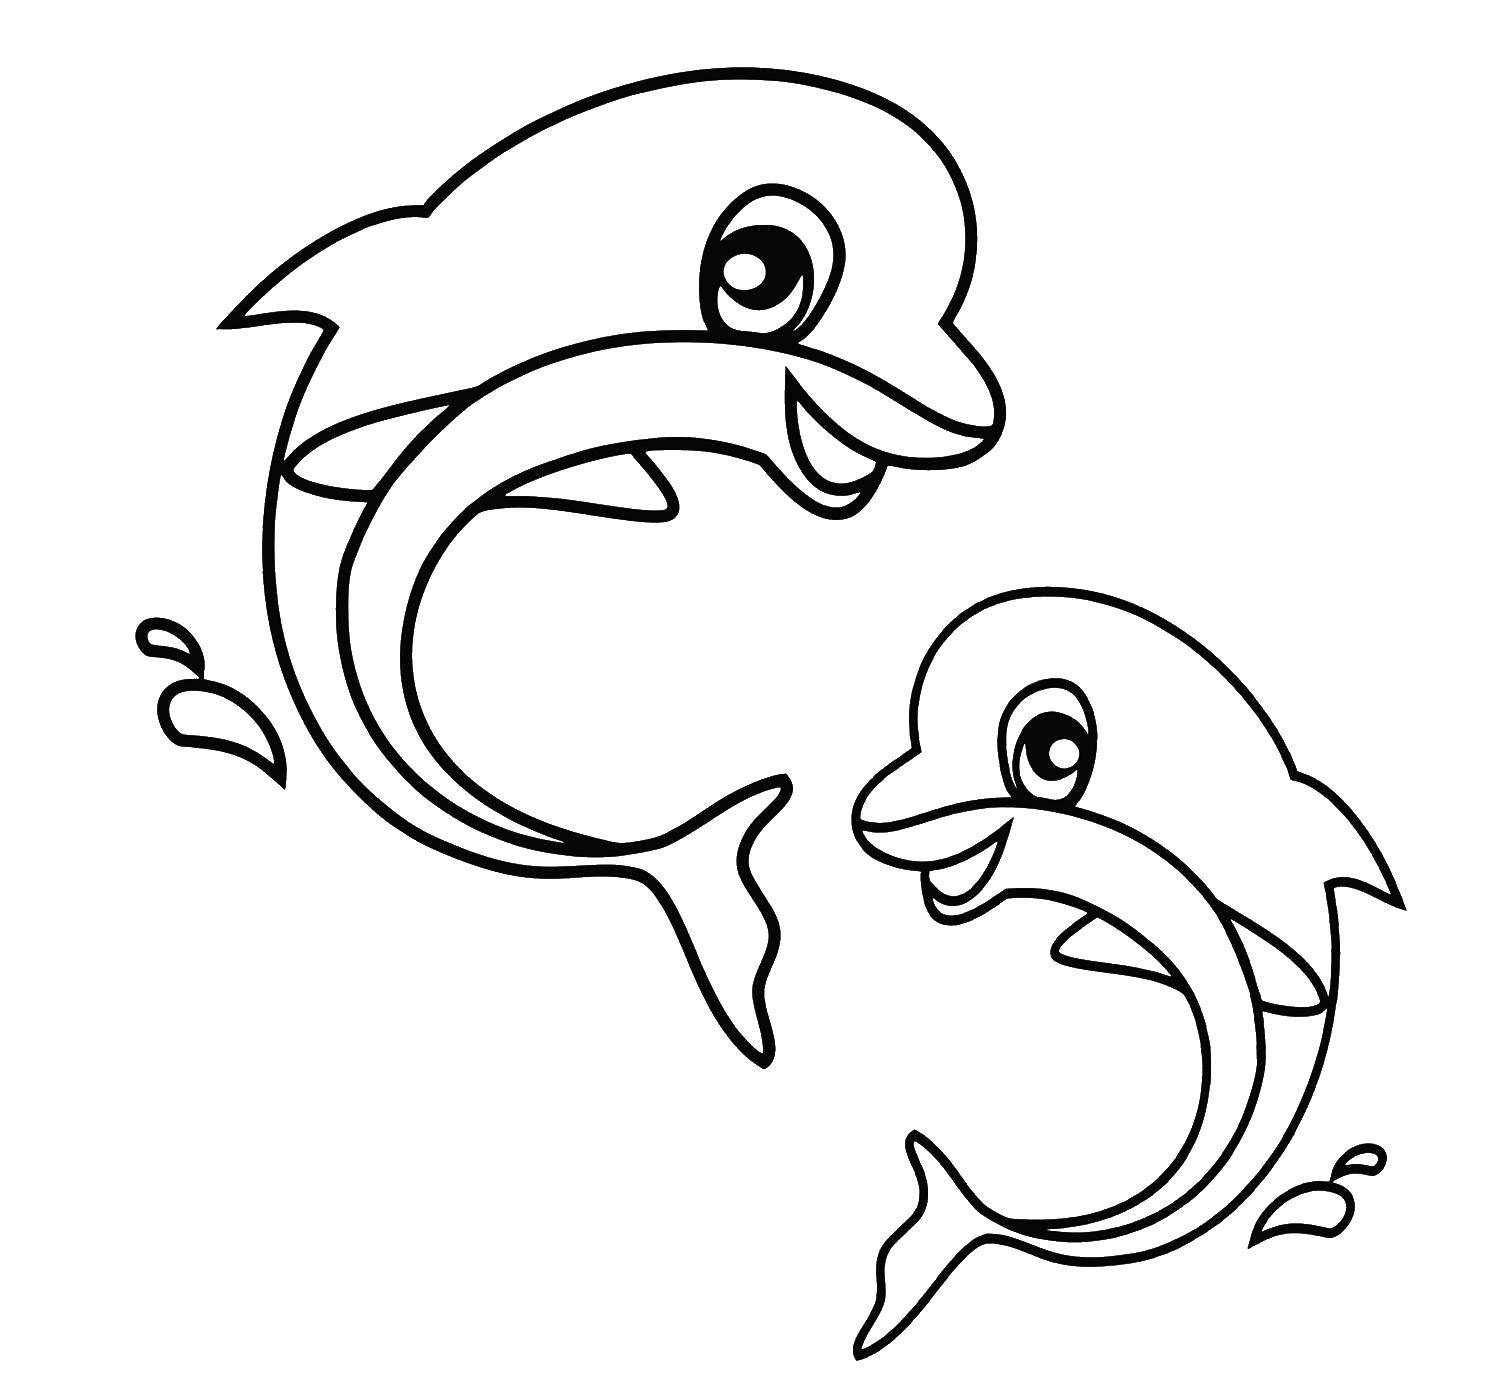 Coloring The dolphins. Category sea animals. Tags:  Underwater world, Dolphin.